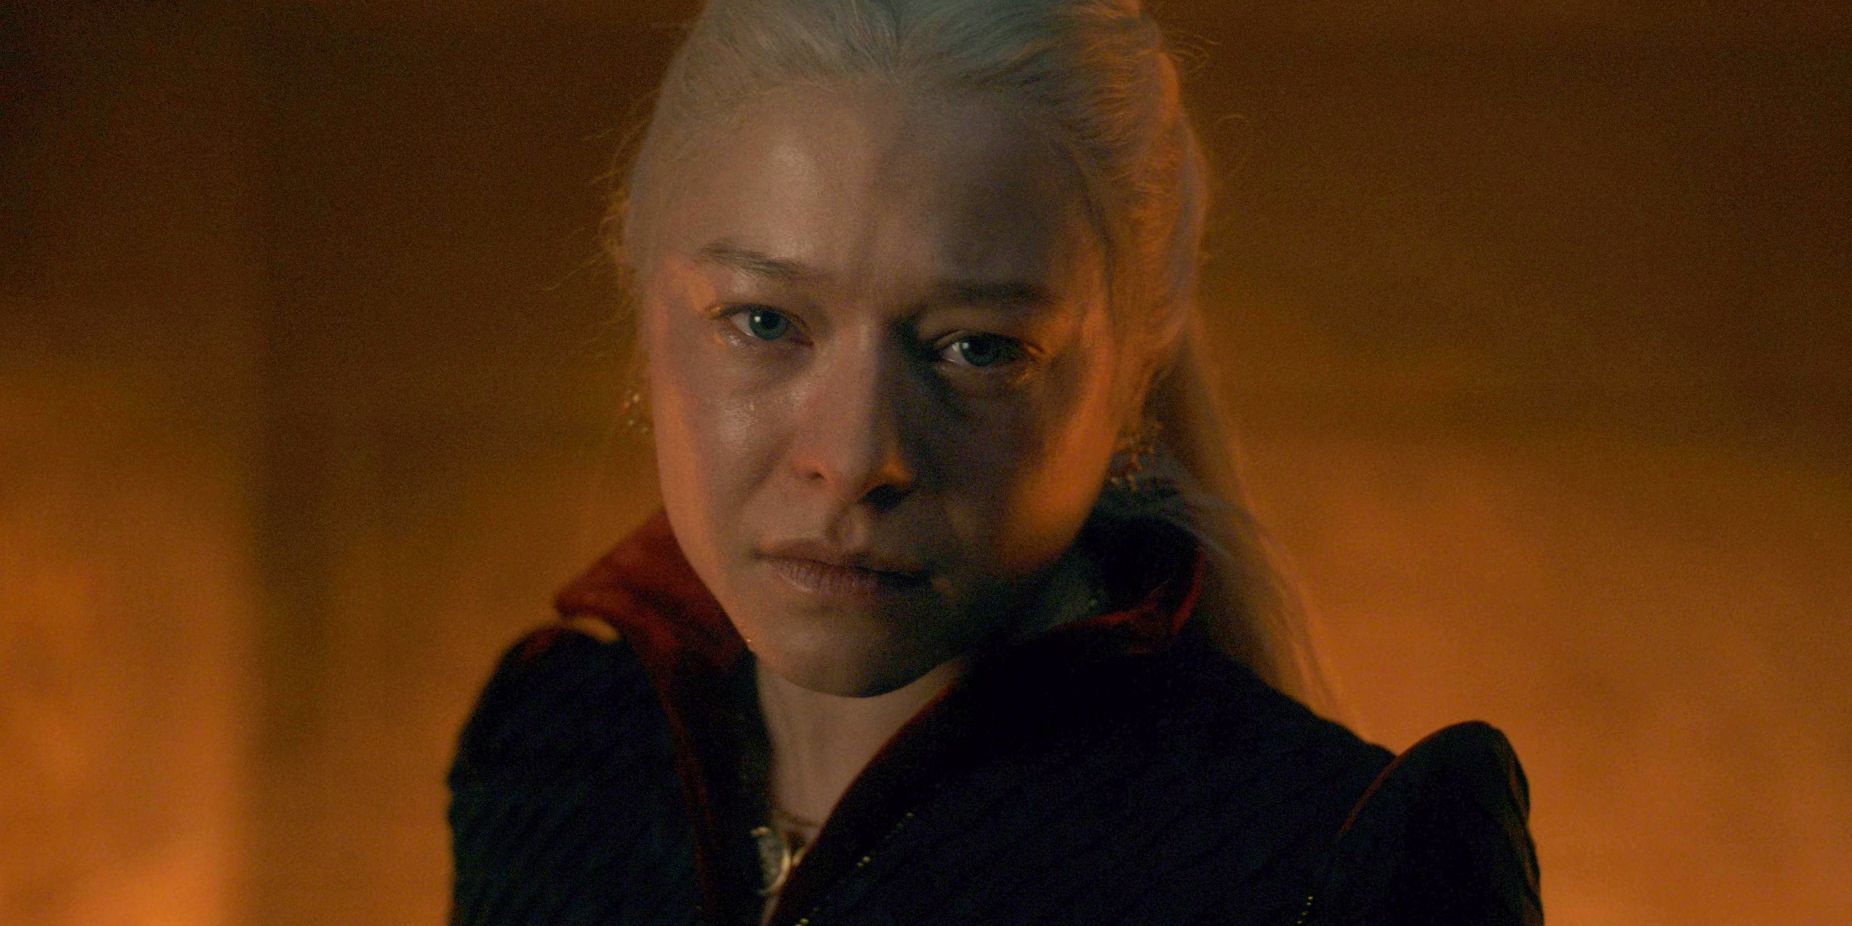 Rhaenyra with a look of pain and rage in House of the Dragon season 1